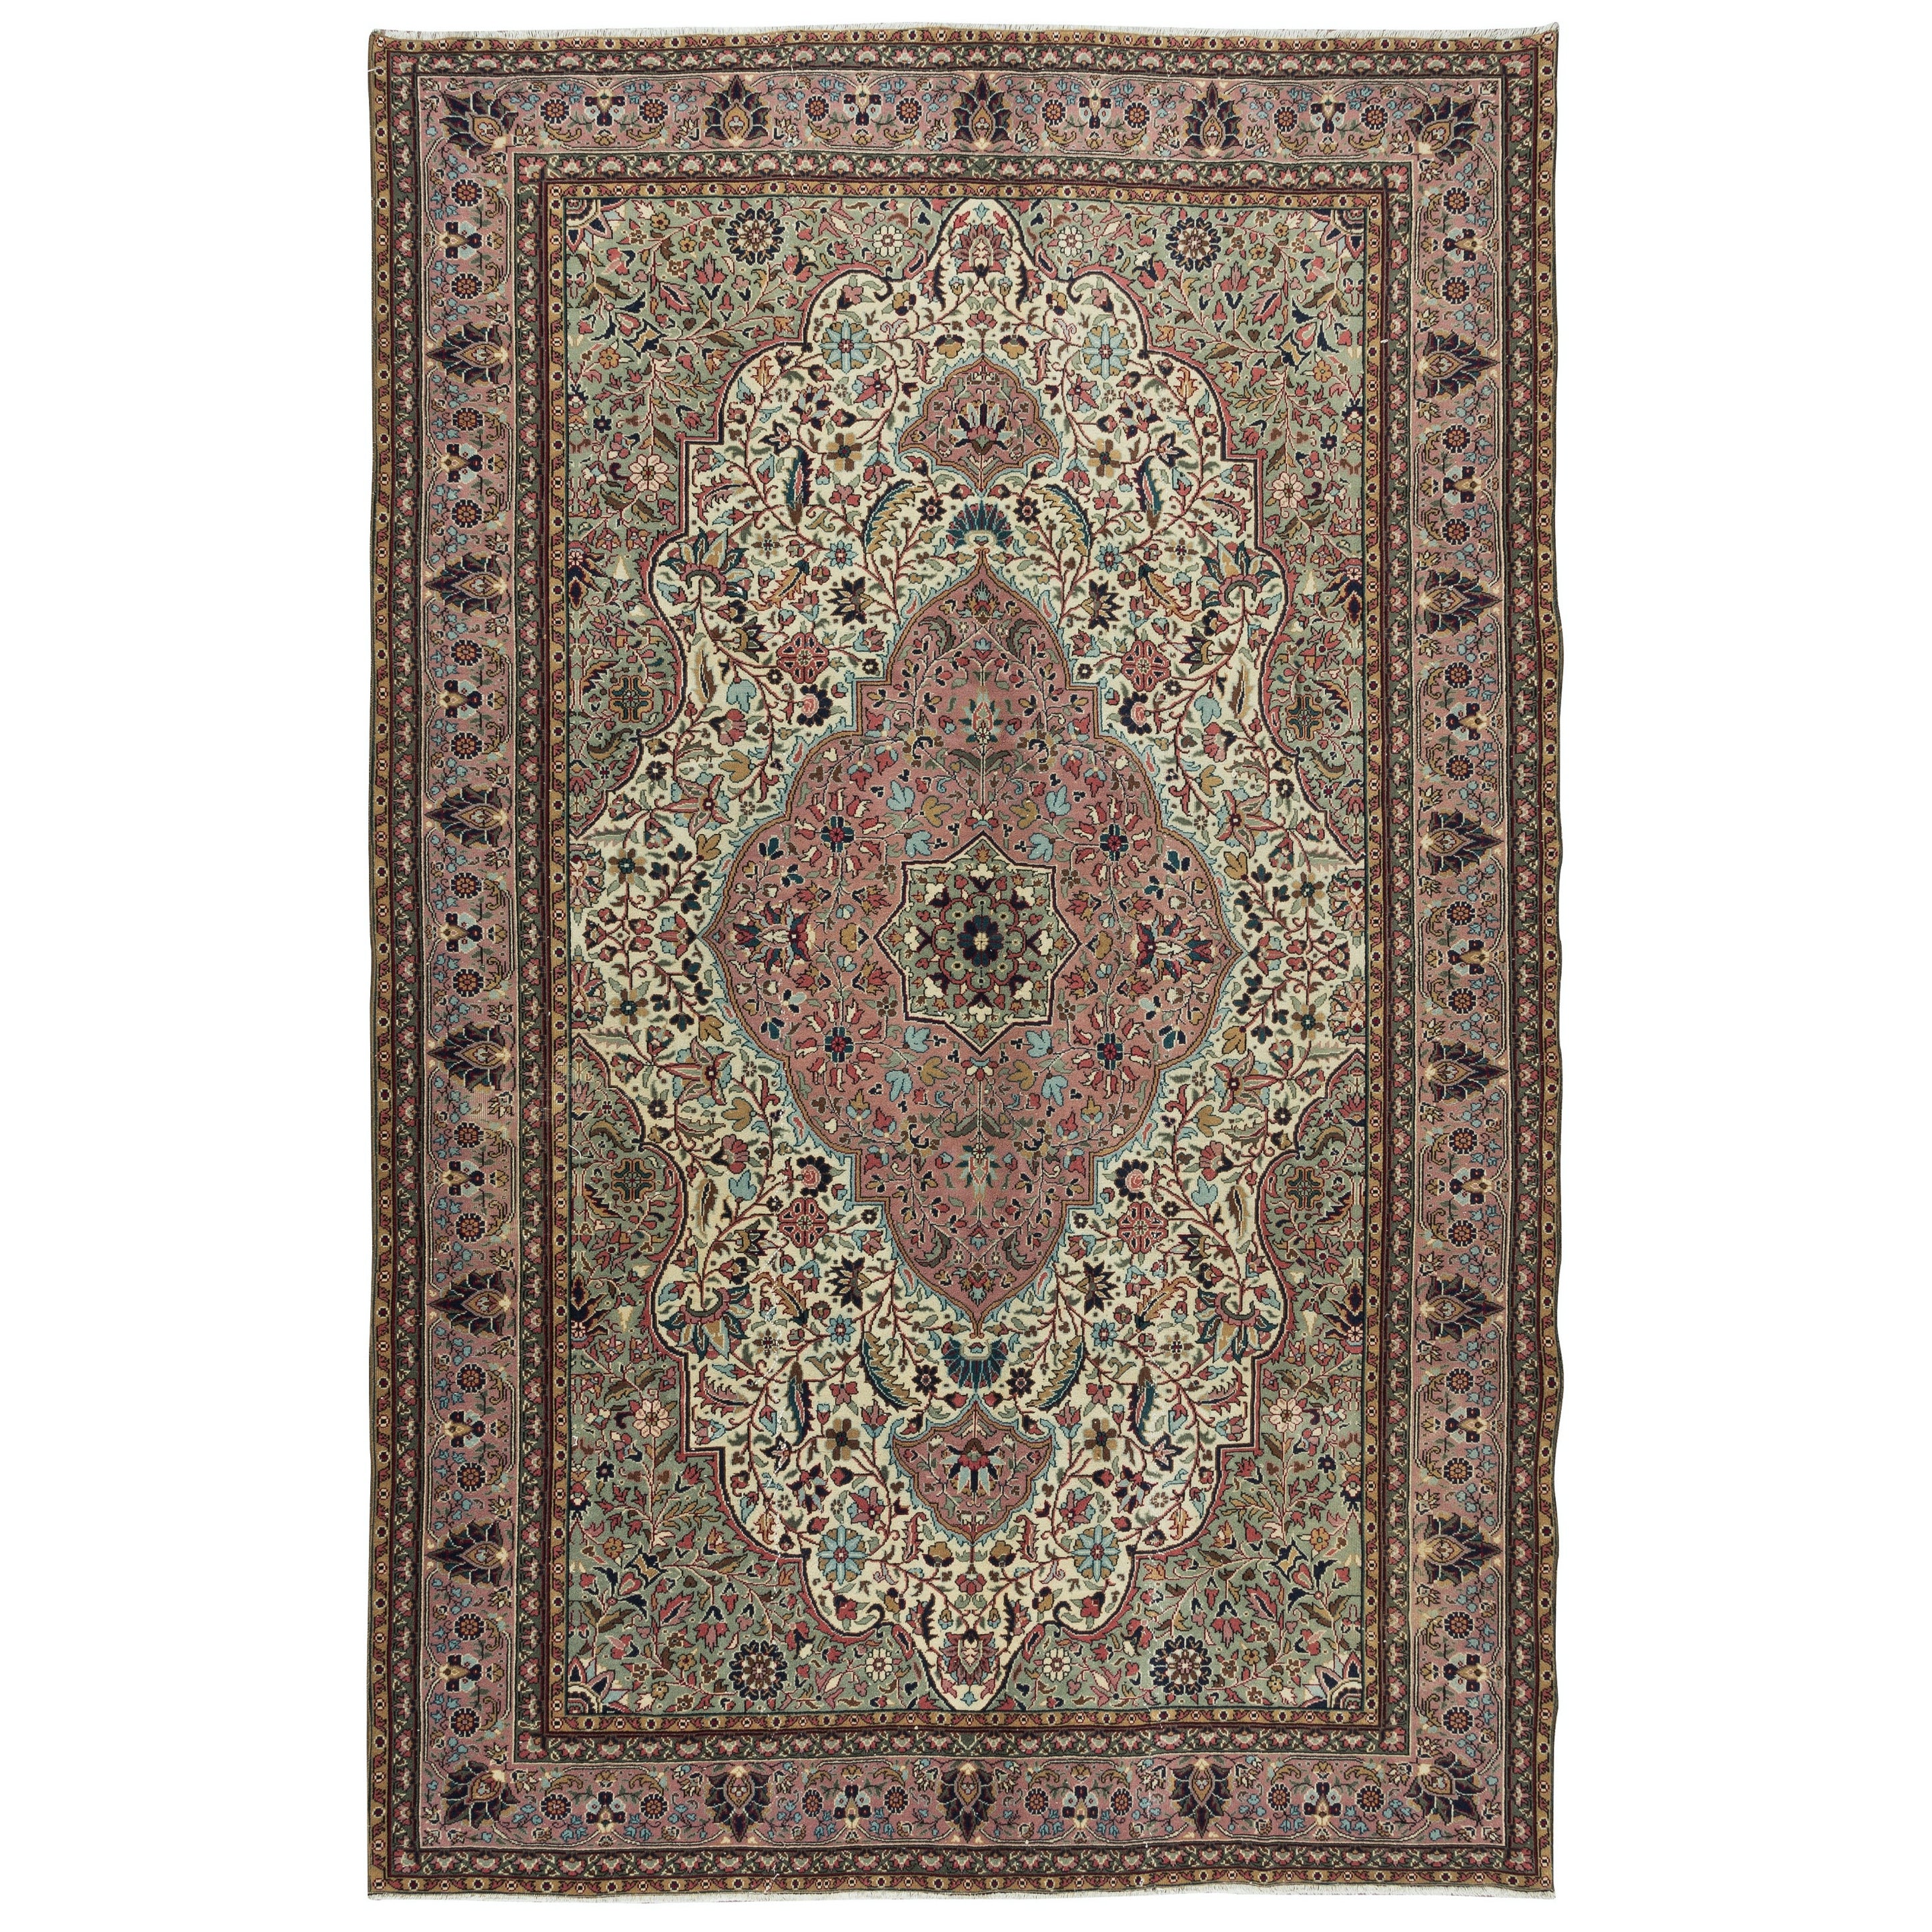 6.4x10.2 Ft One of a Pair Handmade Turkish Area Rug, Vintage Decorative Carpet For Sale